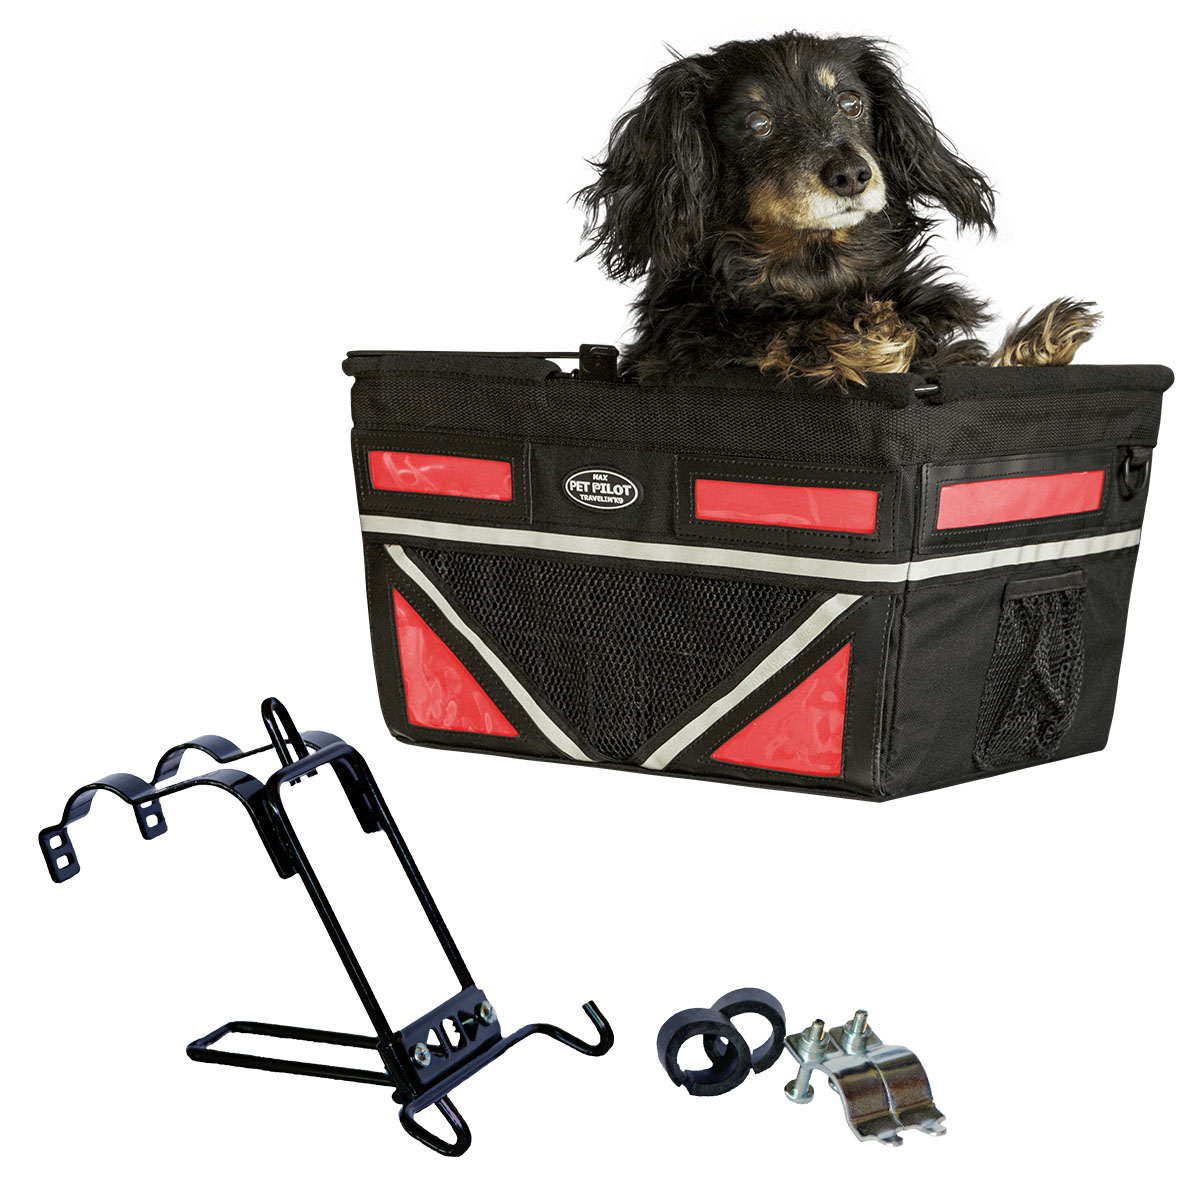 Ptx-8199 Max Dog Bicycle Basket Carrier, Cherry Red